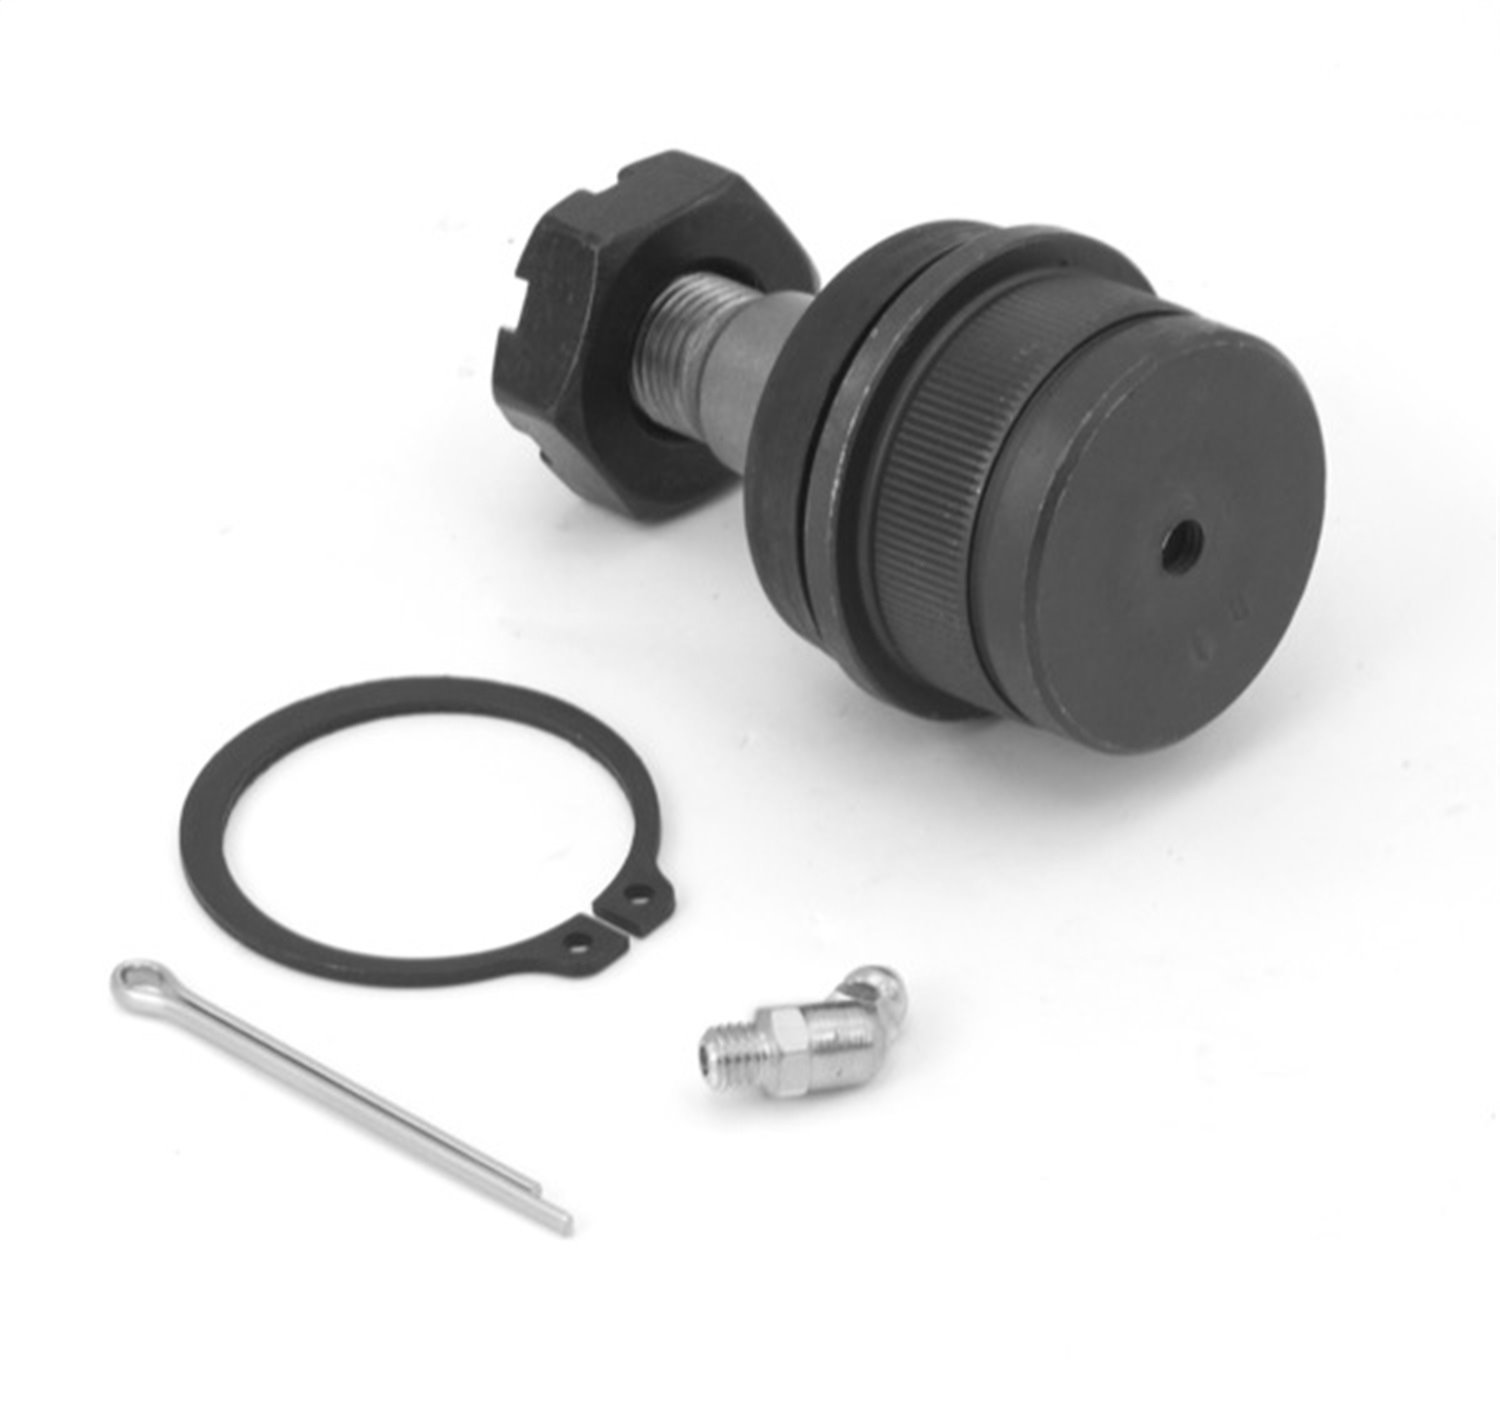 This lower Ball Joint kit from Omix-ADA fits 87-06 Jeep models. It includes one lower Ball Joint and the associated hardware.